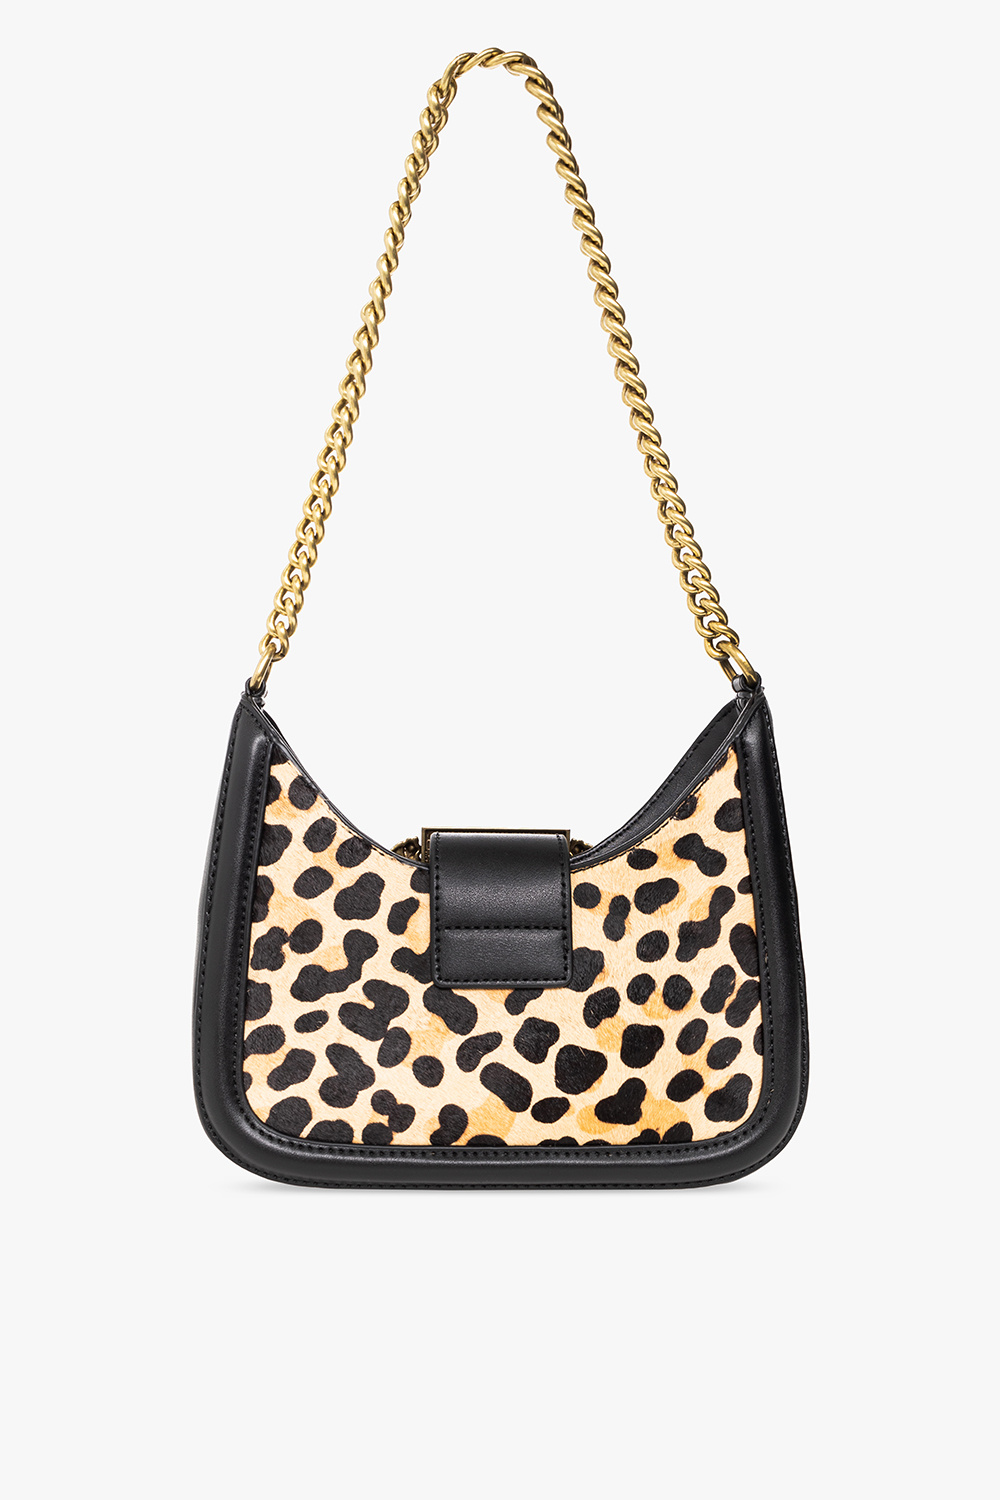 Versace Jeans Couture Shoulder bag with animal pattern